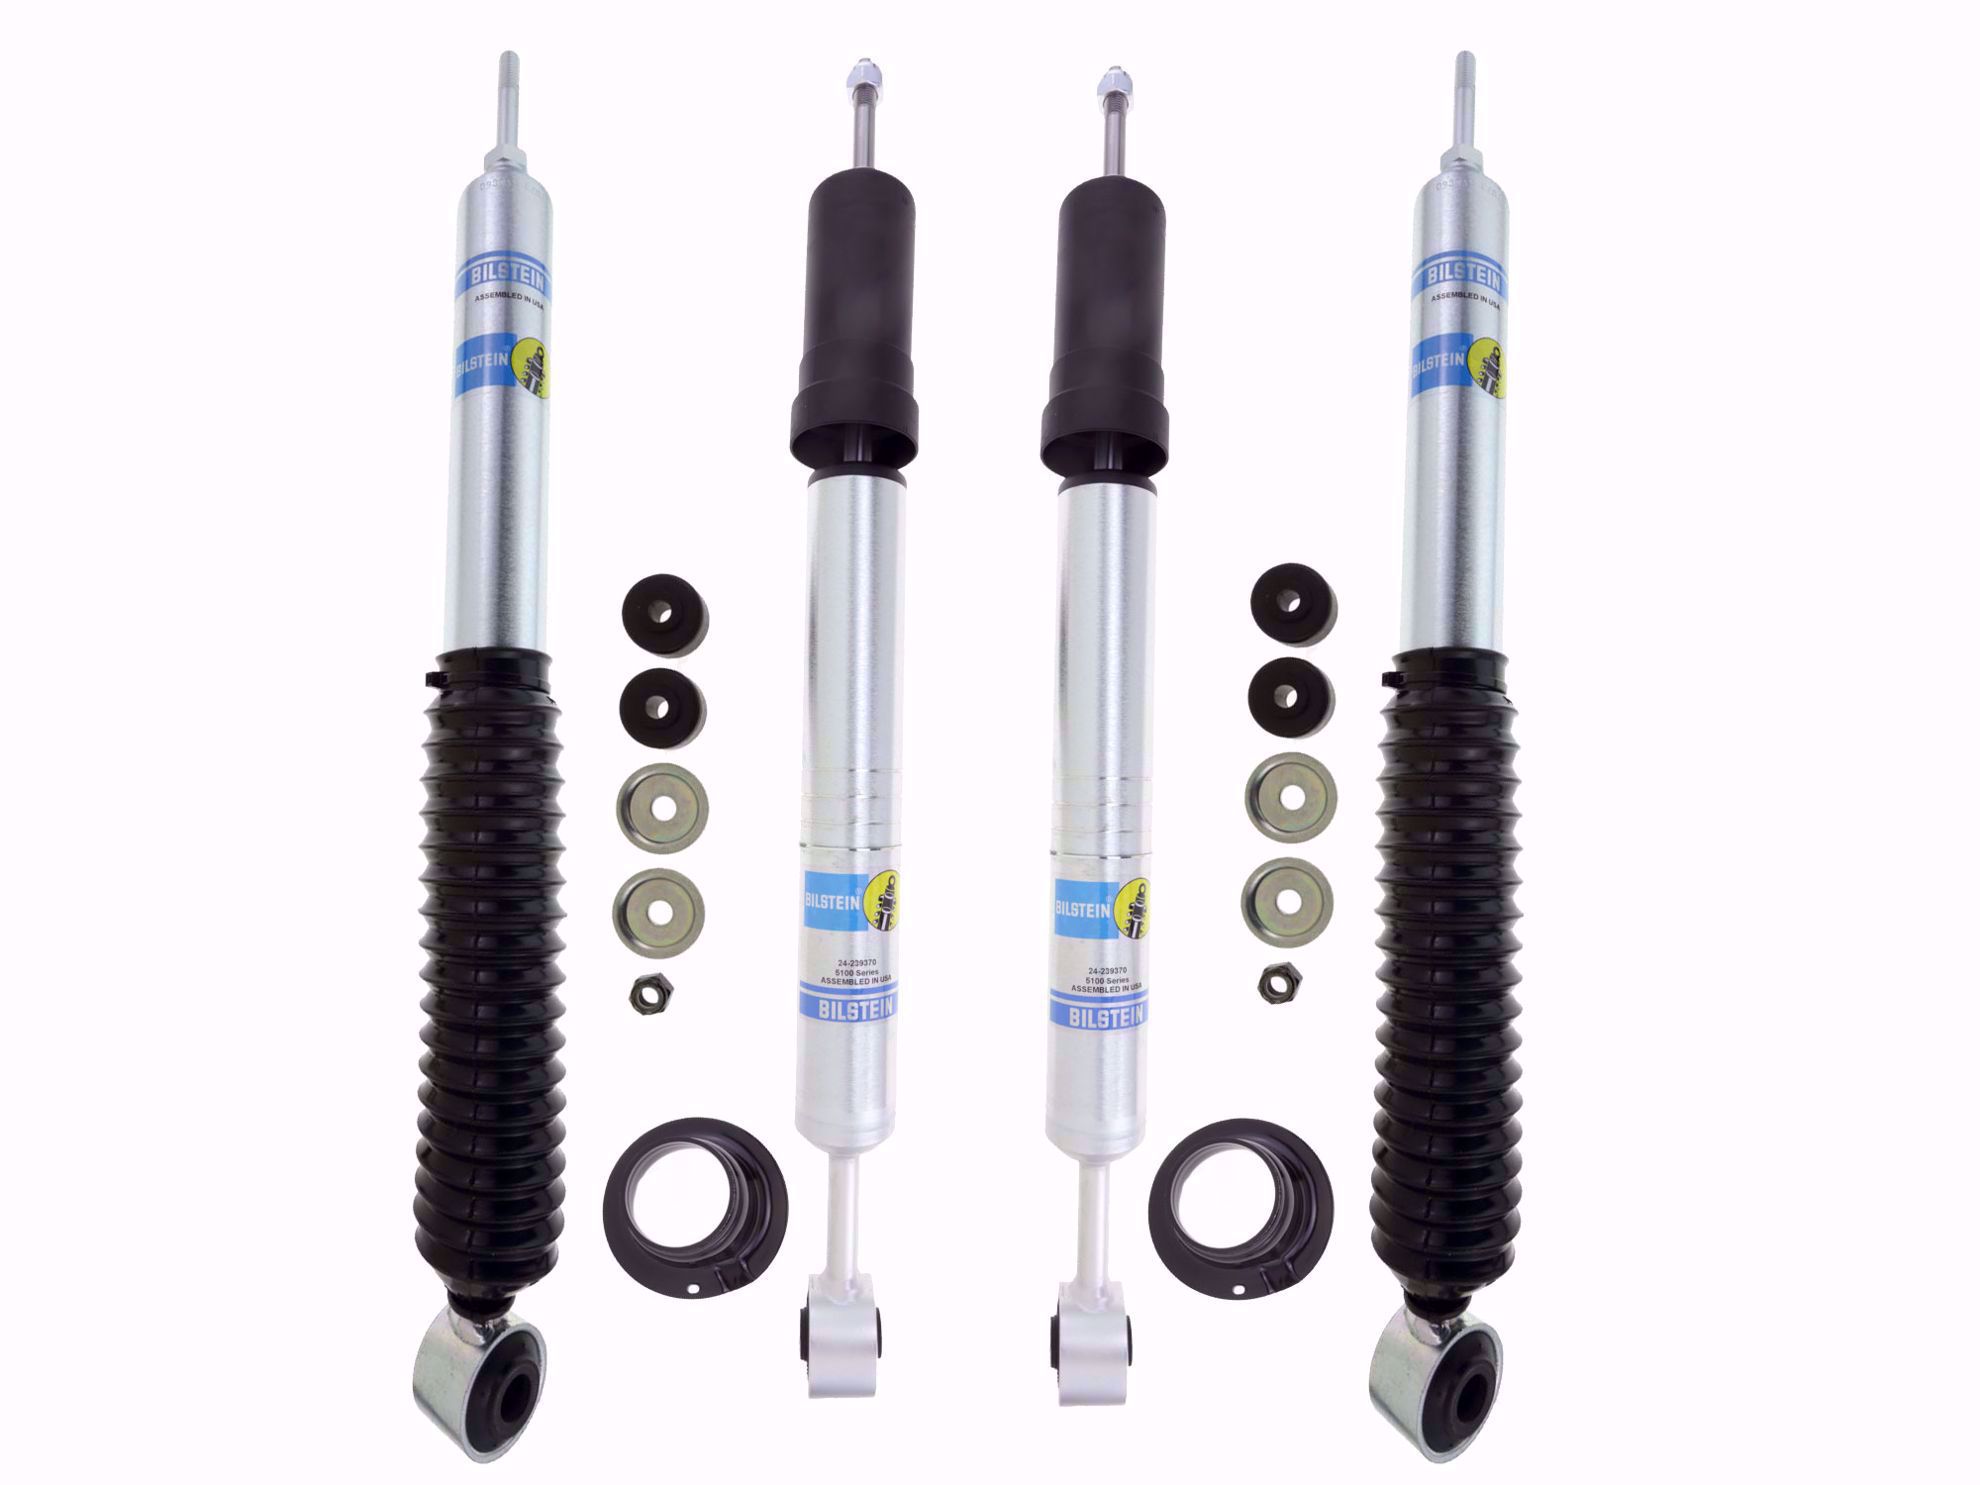 Bilstein B8 5100 Kit 2 Front Shocks For 2005-2010 Jeep Grand Cherokee Wk 4WD 0.75-2 inch Lift Ride Monotube Gas Charged Height Adjustable Series Replacement Shock Absorbers 